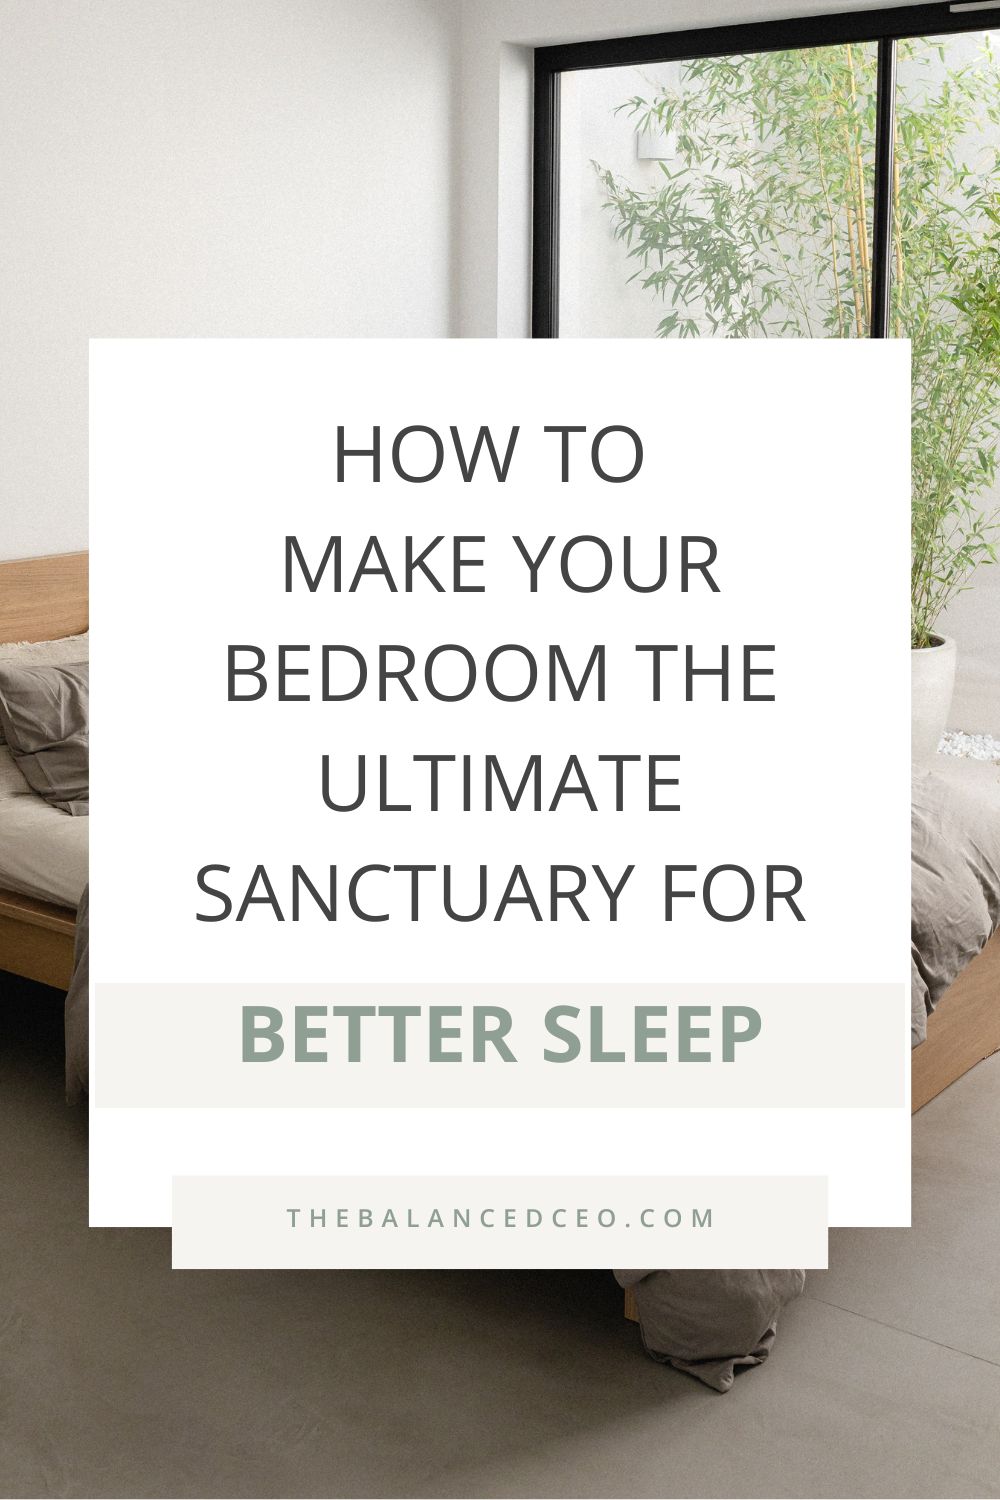 How to Make Your Bedroom the Ultimate Sanctuary for Better Sleep